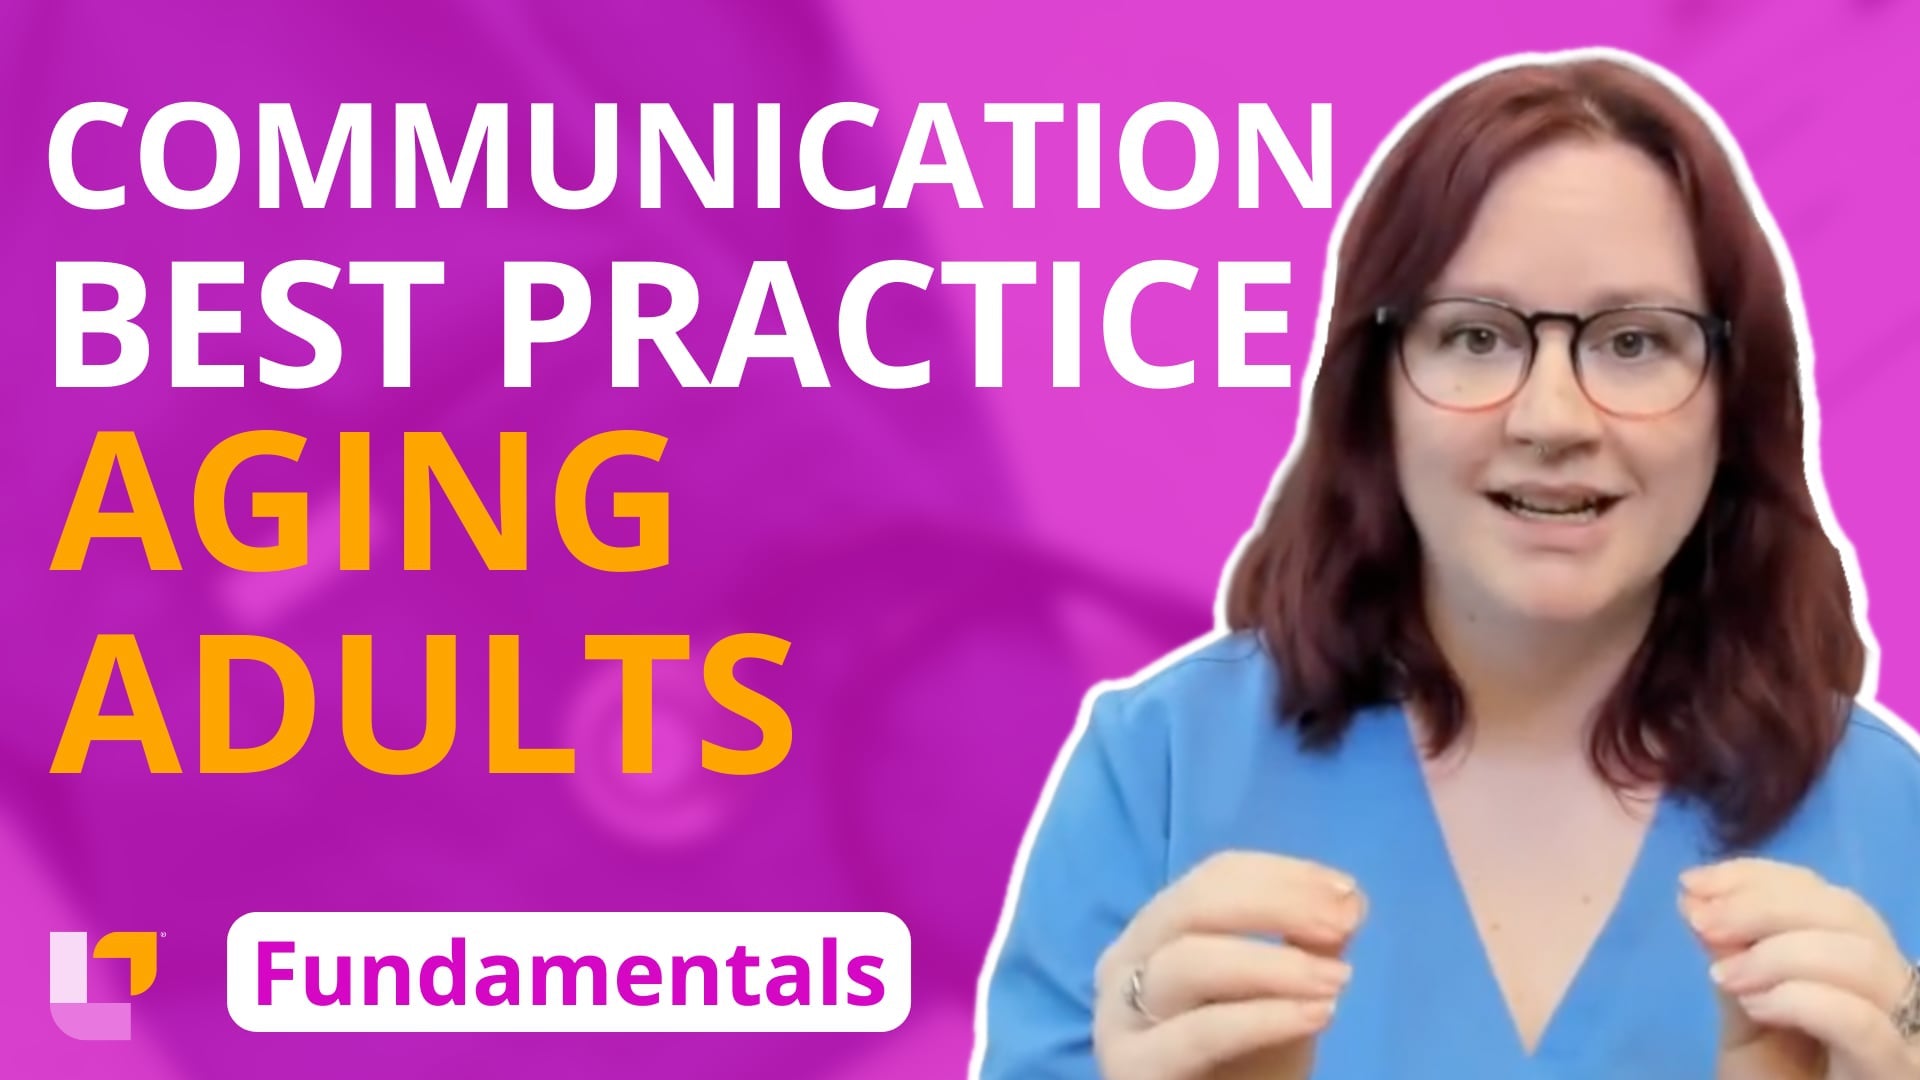 Fundamentals - Gerontology, part 8: Communication Practice for Aging Adults - LevelUpRN